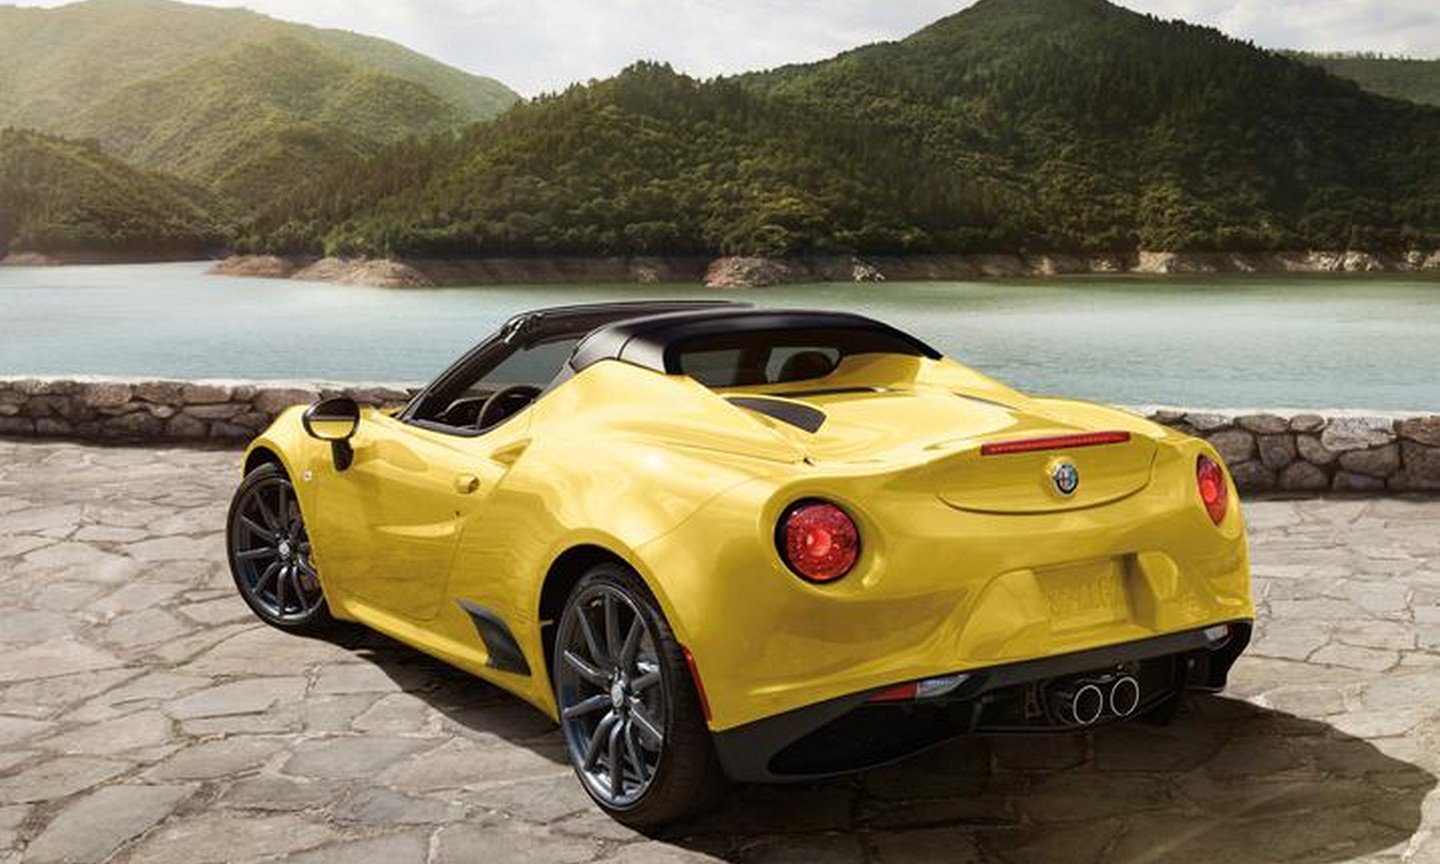 Velocity Honolulu on Twitter: "The 2019 Alfa Romeo 4C Spider: everything an  Italian sports car was meant to be. https://t.co/VolDADguwP" / Twitter